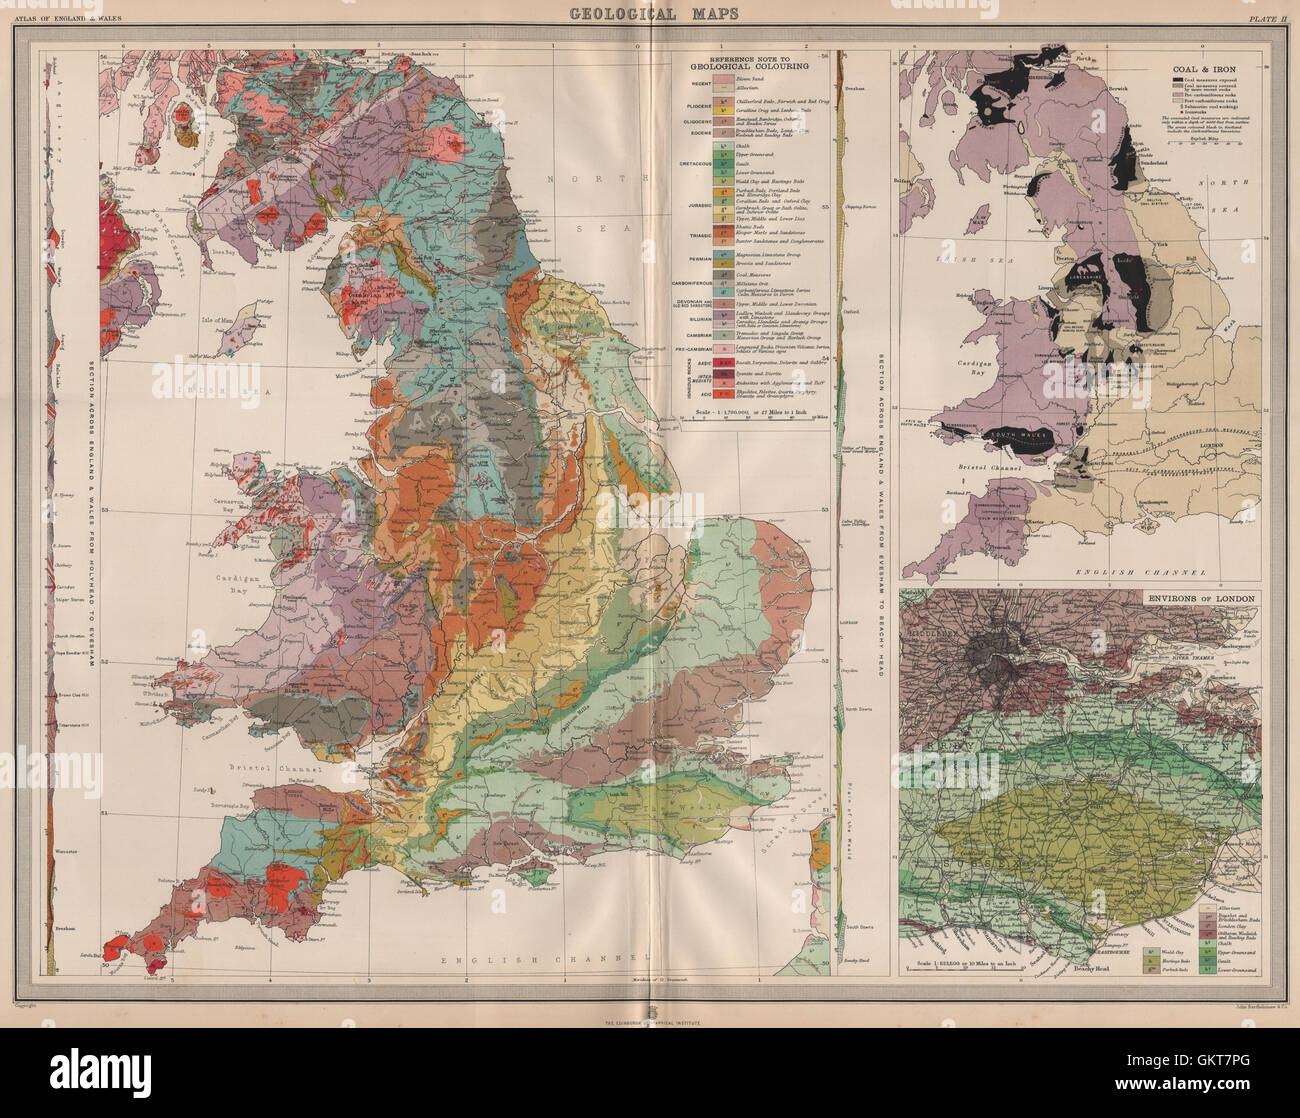 ENGLAND AND WALES. Geology. Coal & iron deposits. Geological. LARGE, 1903 map Stock Photo